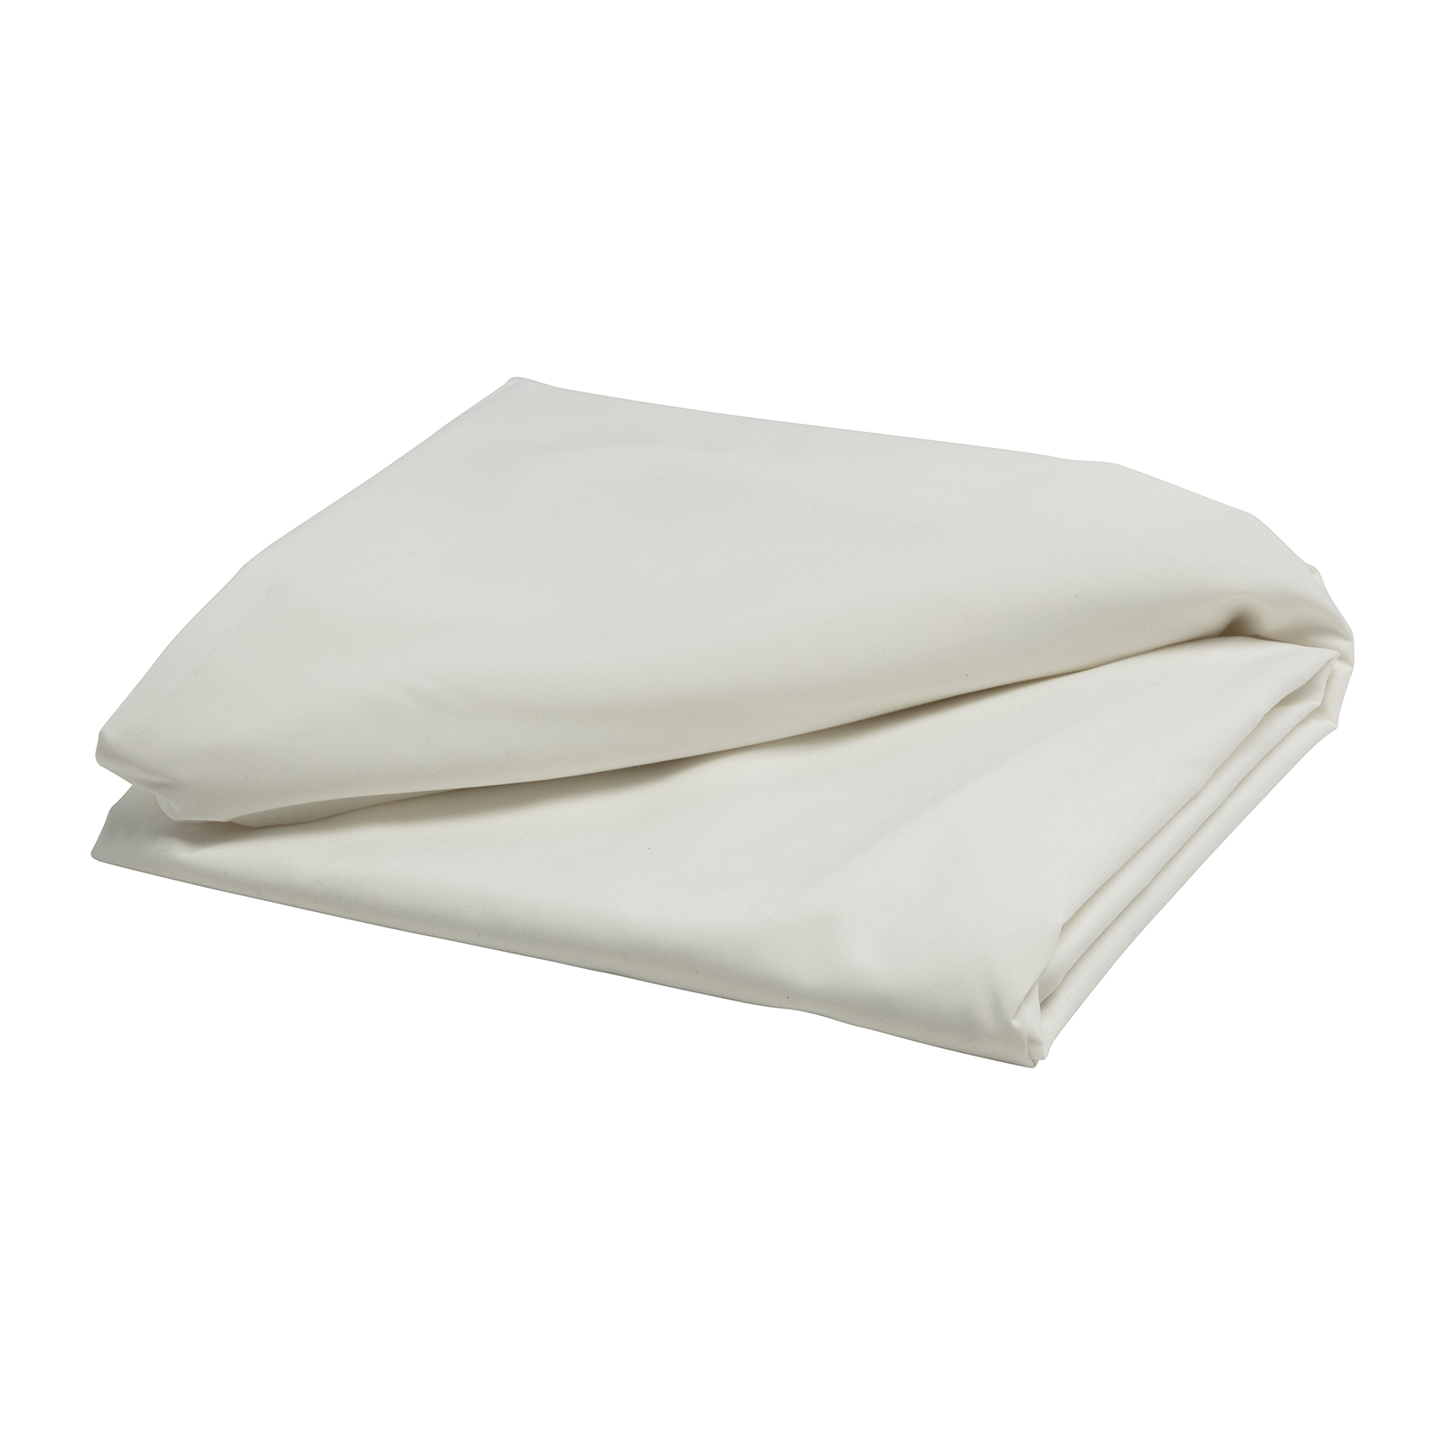 Shikifuton protective cover folded on a solid white backdrop. The top of the cover is folded back at an angle.